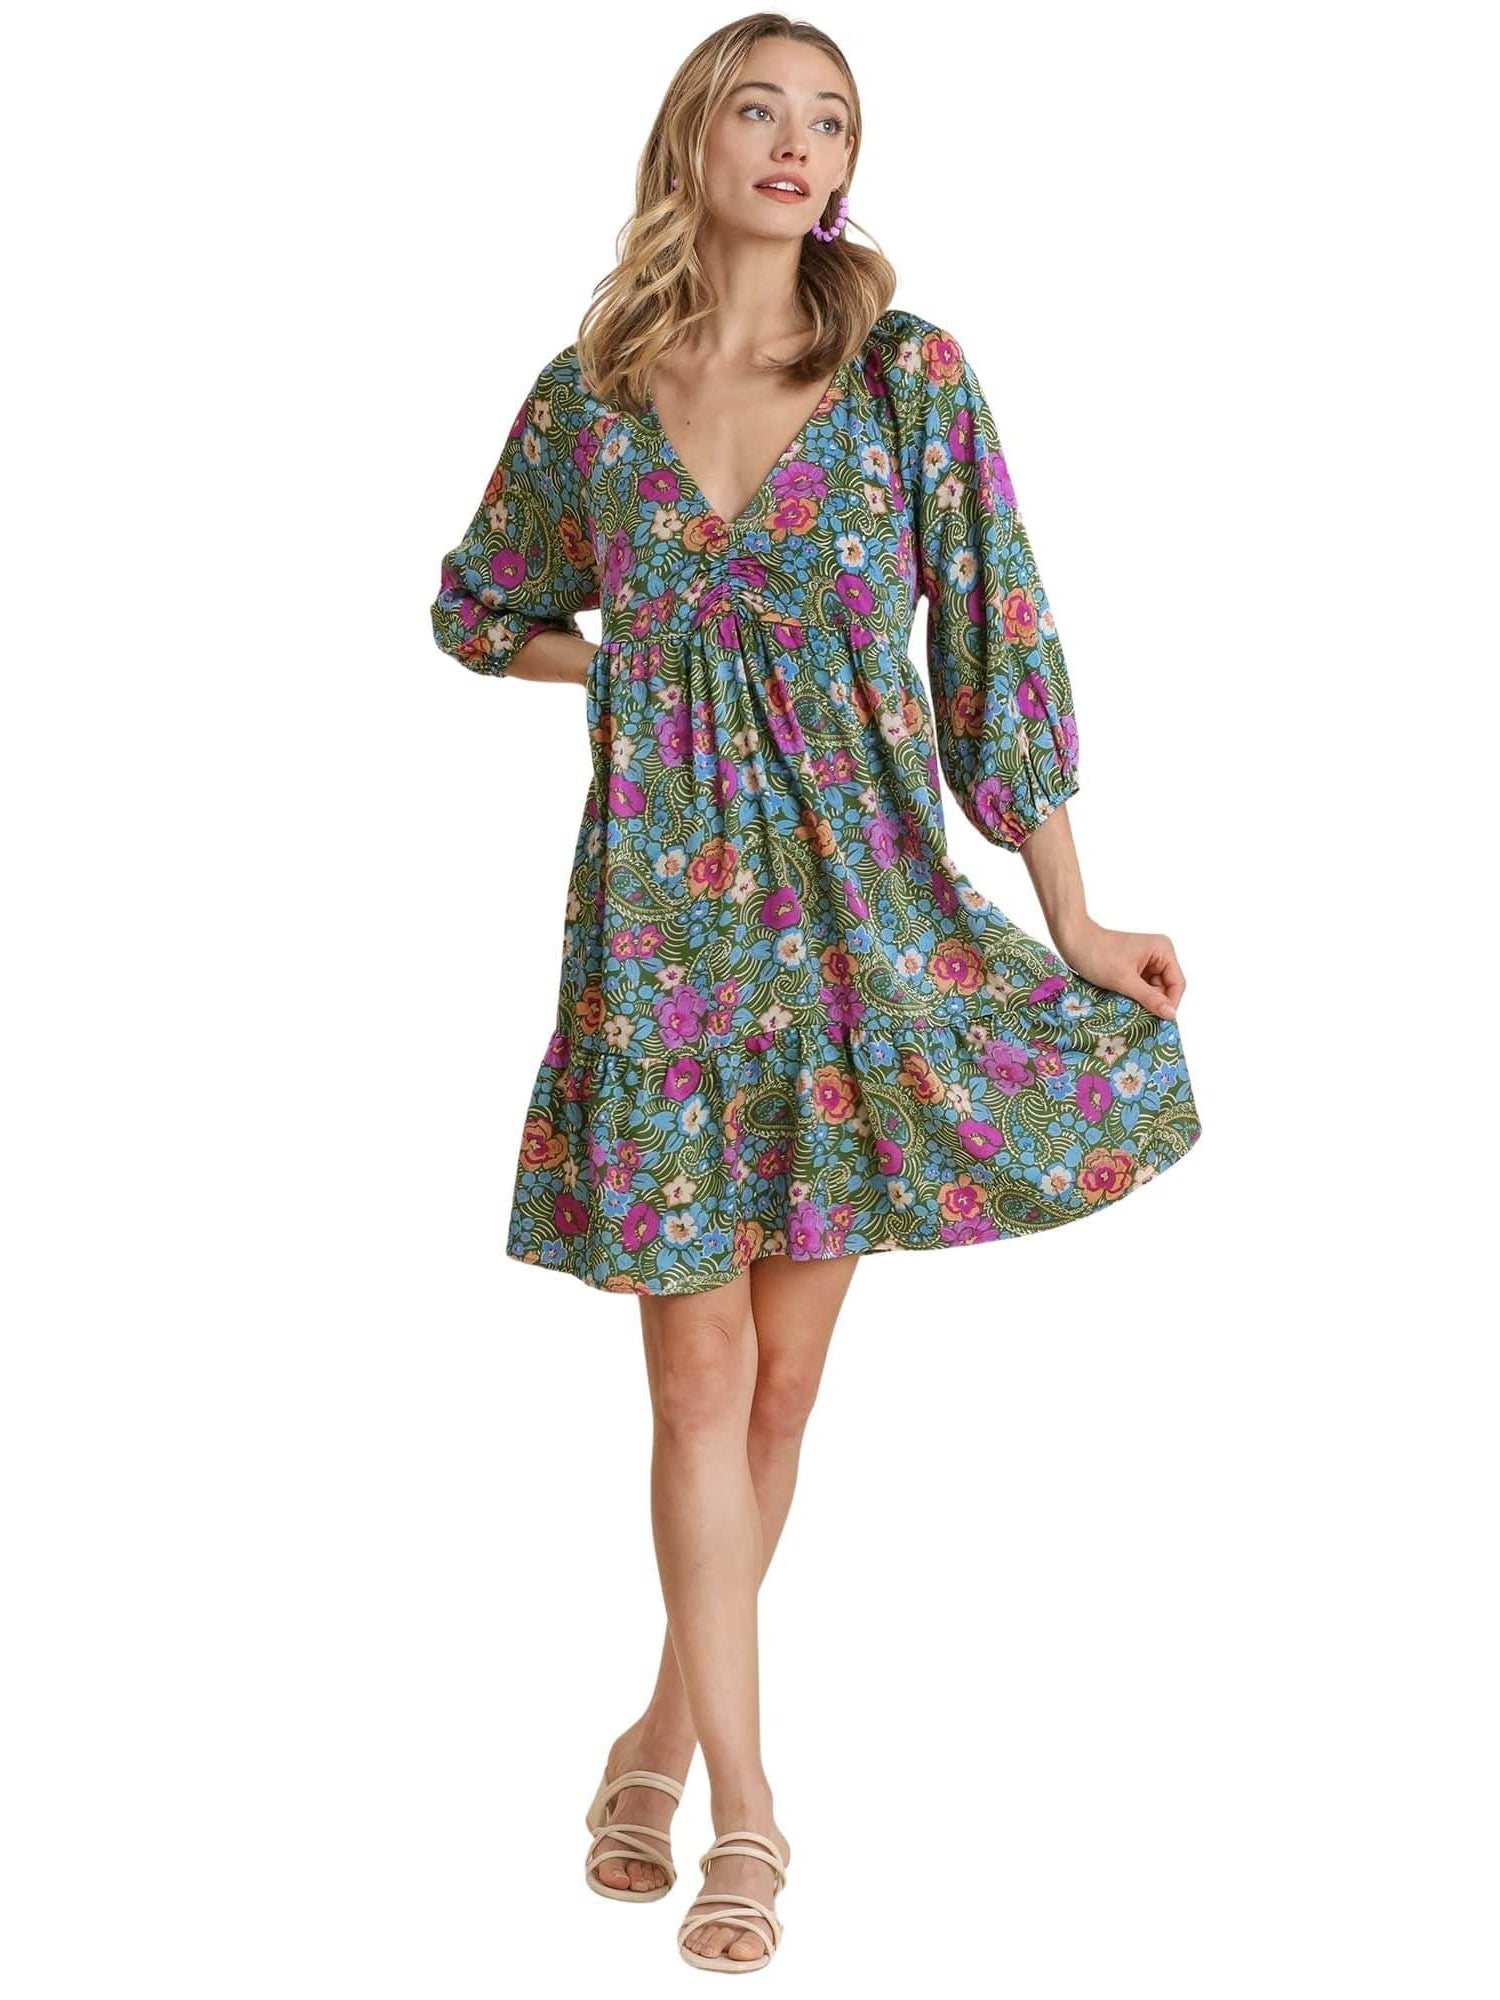 Boutique Pensacola The Best Of Me Floral Dress, Green